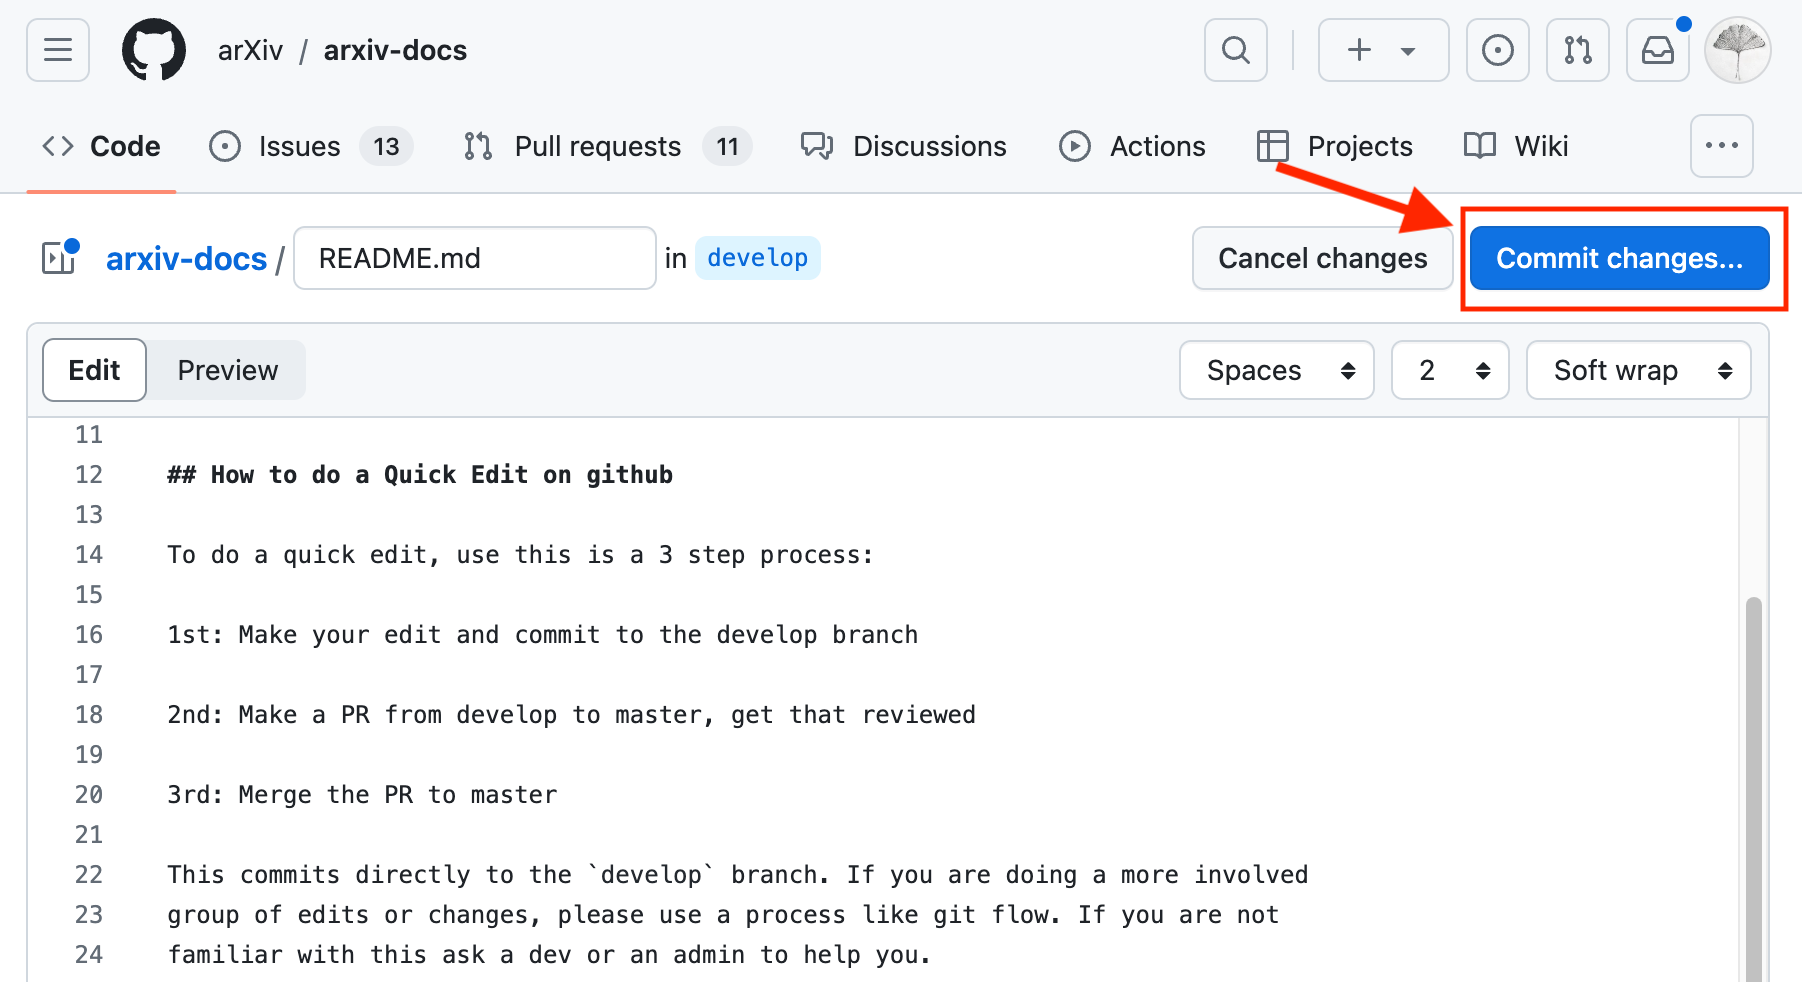 Screenshot of the location of the commit button on the edited page in Github